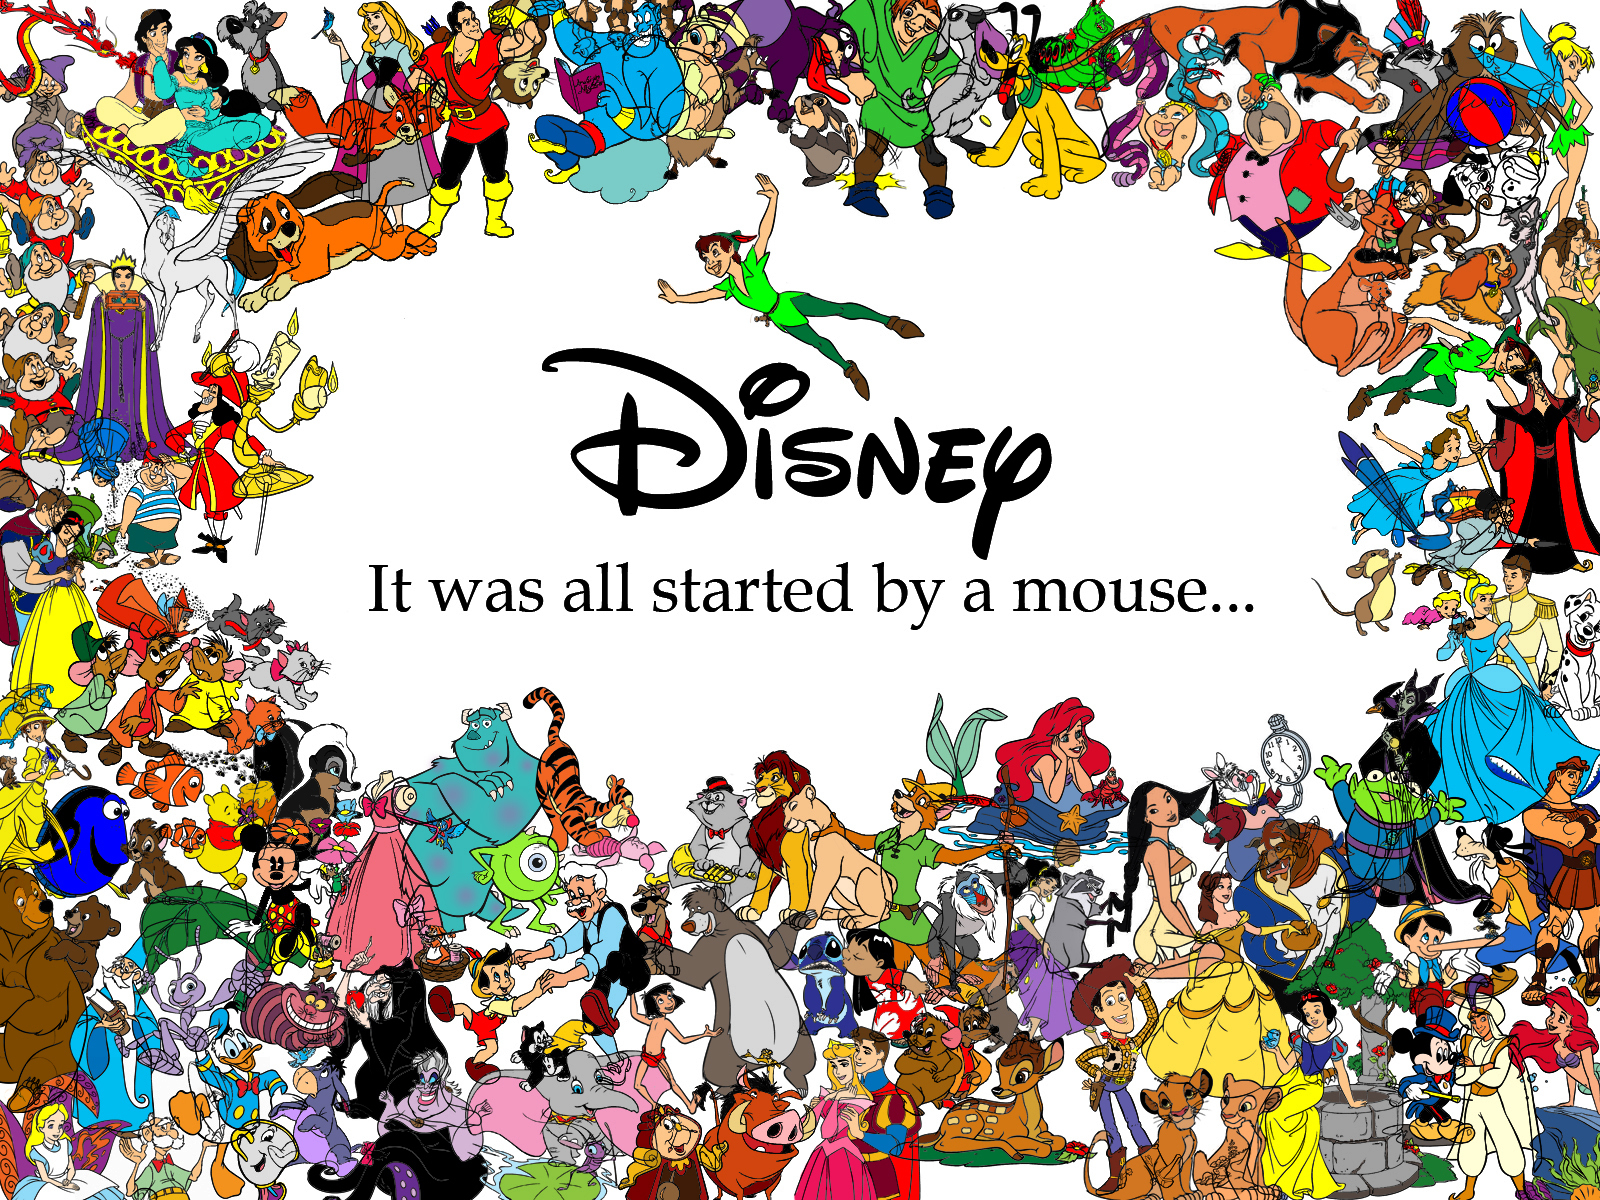 mickey mouse, beast (beauty and the beast), disney, movie, aladdin, alice (alice in wonderland), ariel (the little mermaid), aurora (sleeping beauty), bambi (character), belle (beauty and the beast), captain hook, cinderella, dory (finding nemo), esmeralda (the hunchback of notre dame), evil queen (snow white and the seven dwarfs), genie (disney), gus (cinderella), jafar, jane porter, jaques (cinderella), mike wazowski, mowgli, nala (the lion king), peter pan, pinocchio, pocahontas, prince charming, princess jasmine, scar (the lion king), simba, snow white, tarzan, tiger (winnie the pooh), tinker bell, ursula (the little mermaid), wendy darling, woody (toy story)